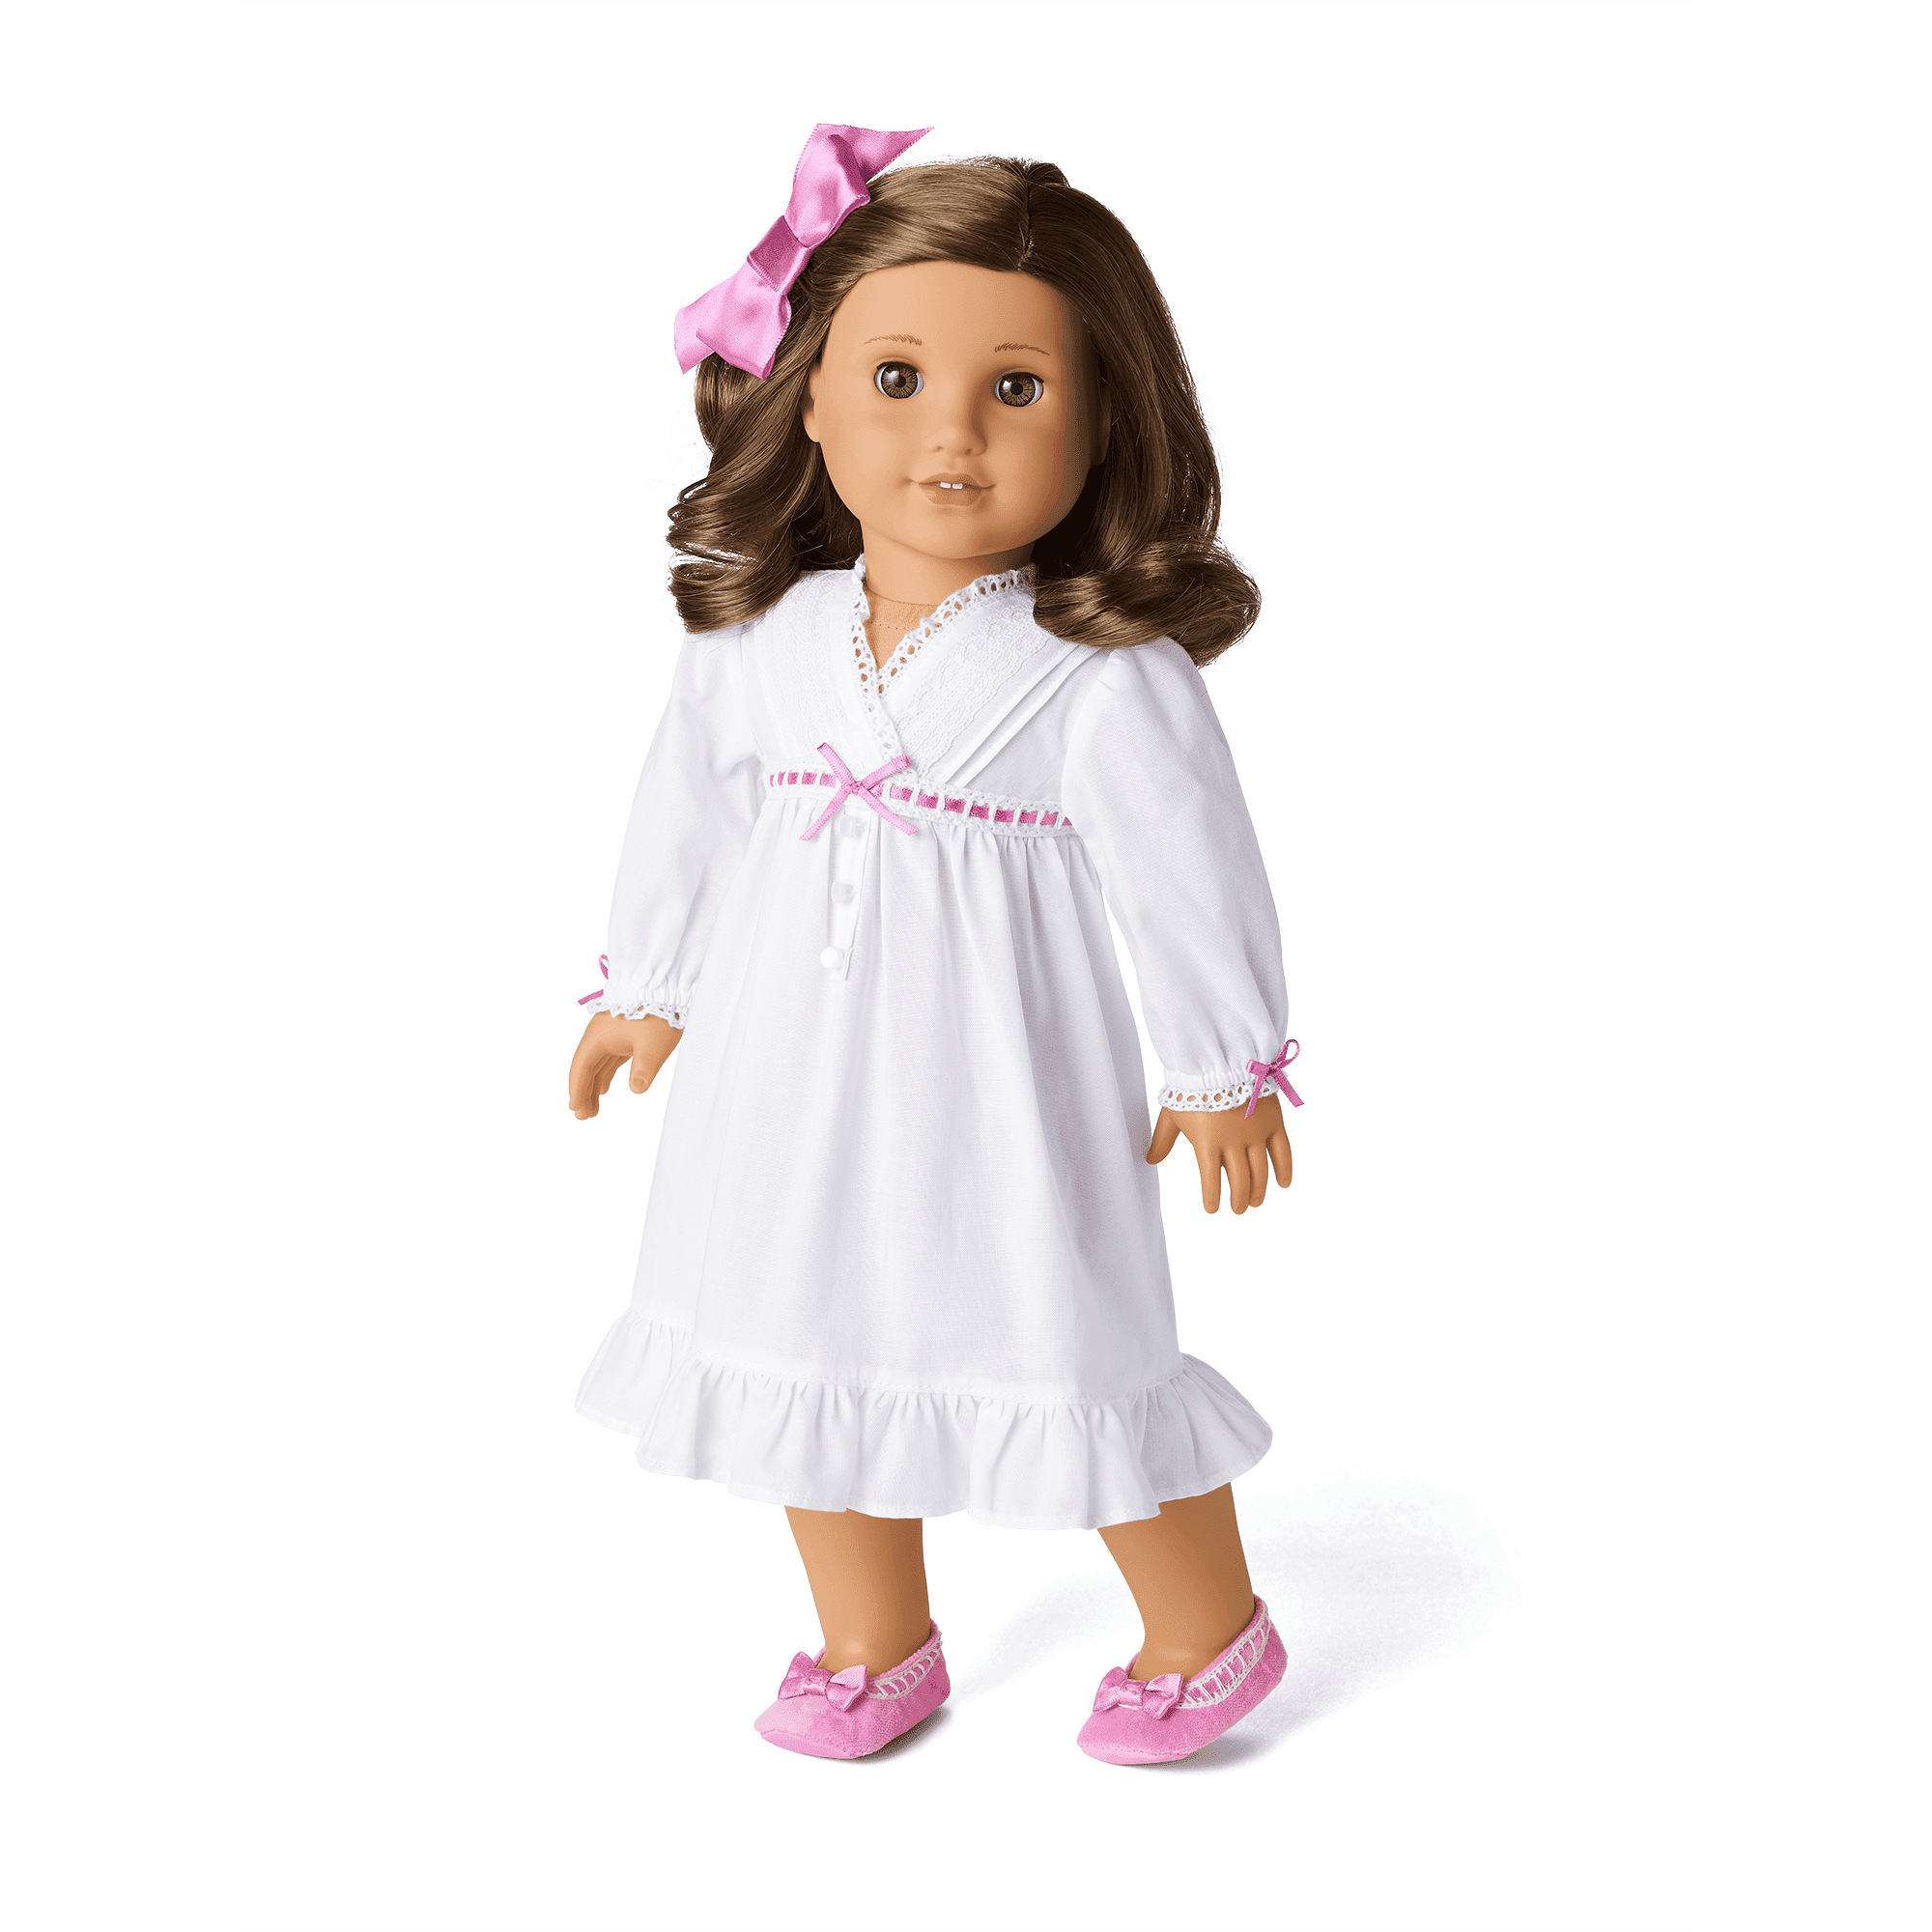 Rebecca’s™ Nightgown for 18-inch Dolls